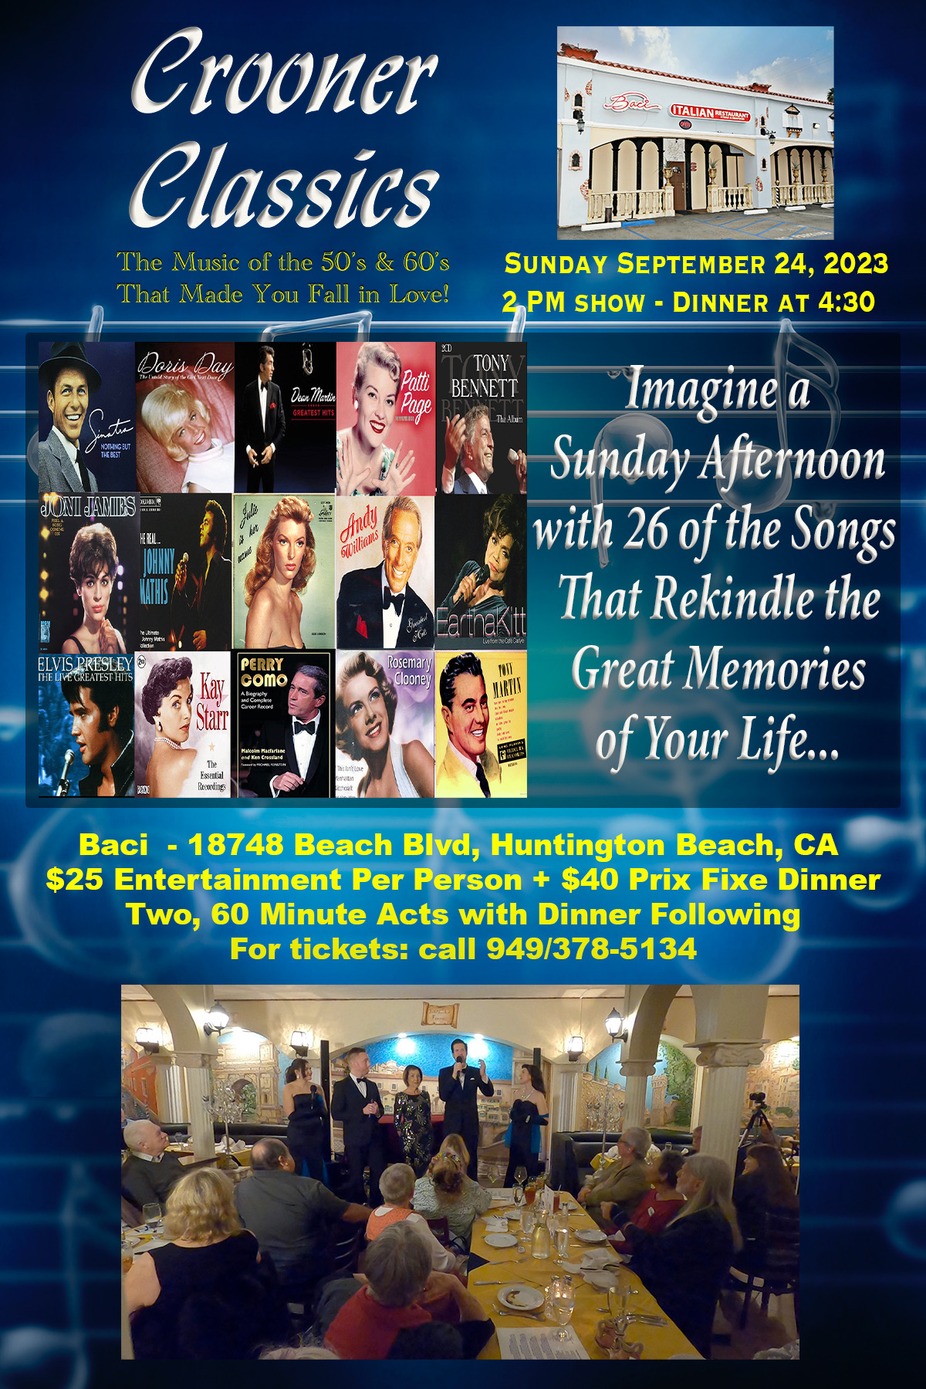 Crooner Classics by Nancy's Cabaret Sunday September 24th event photo